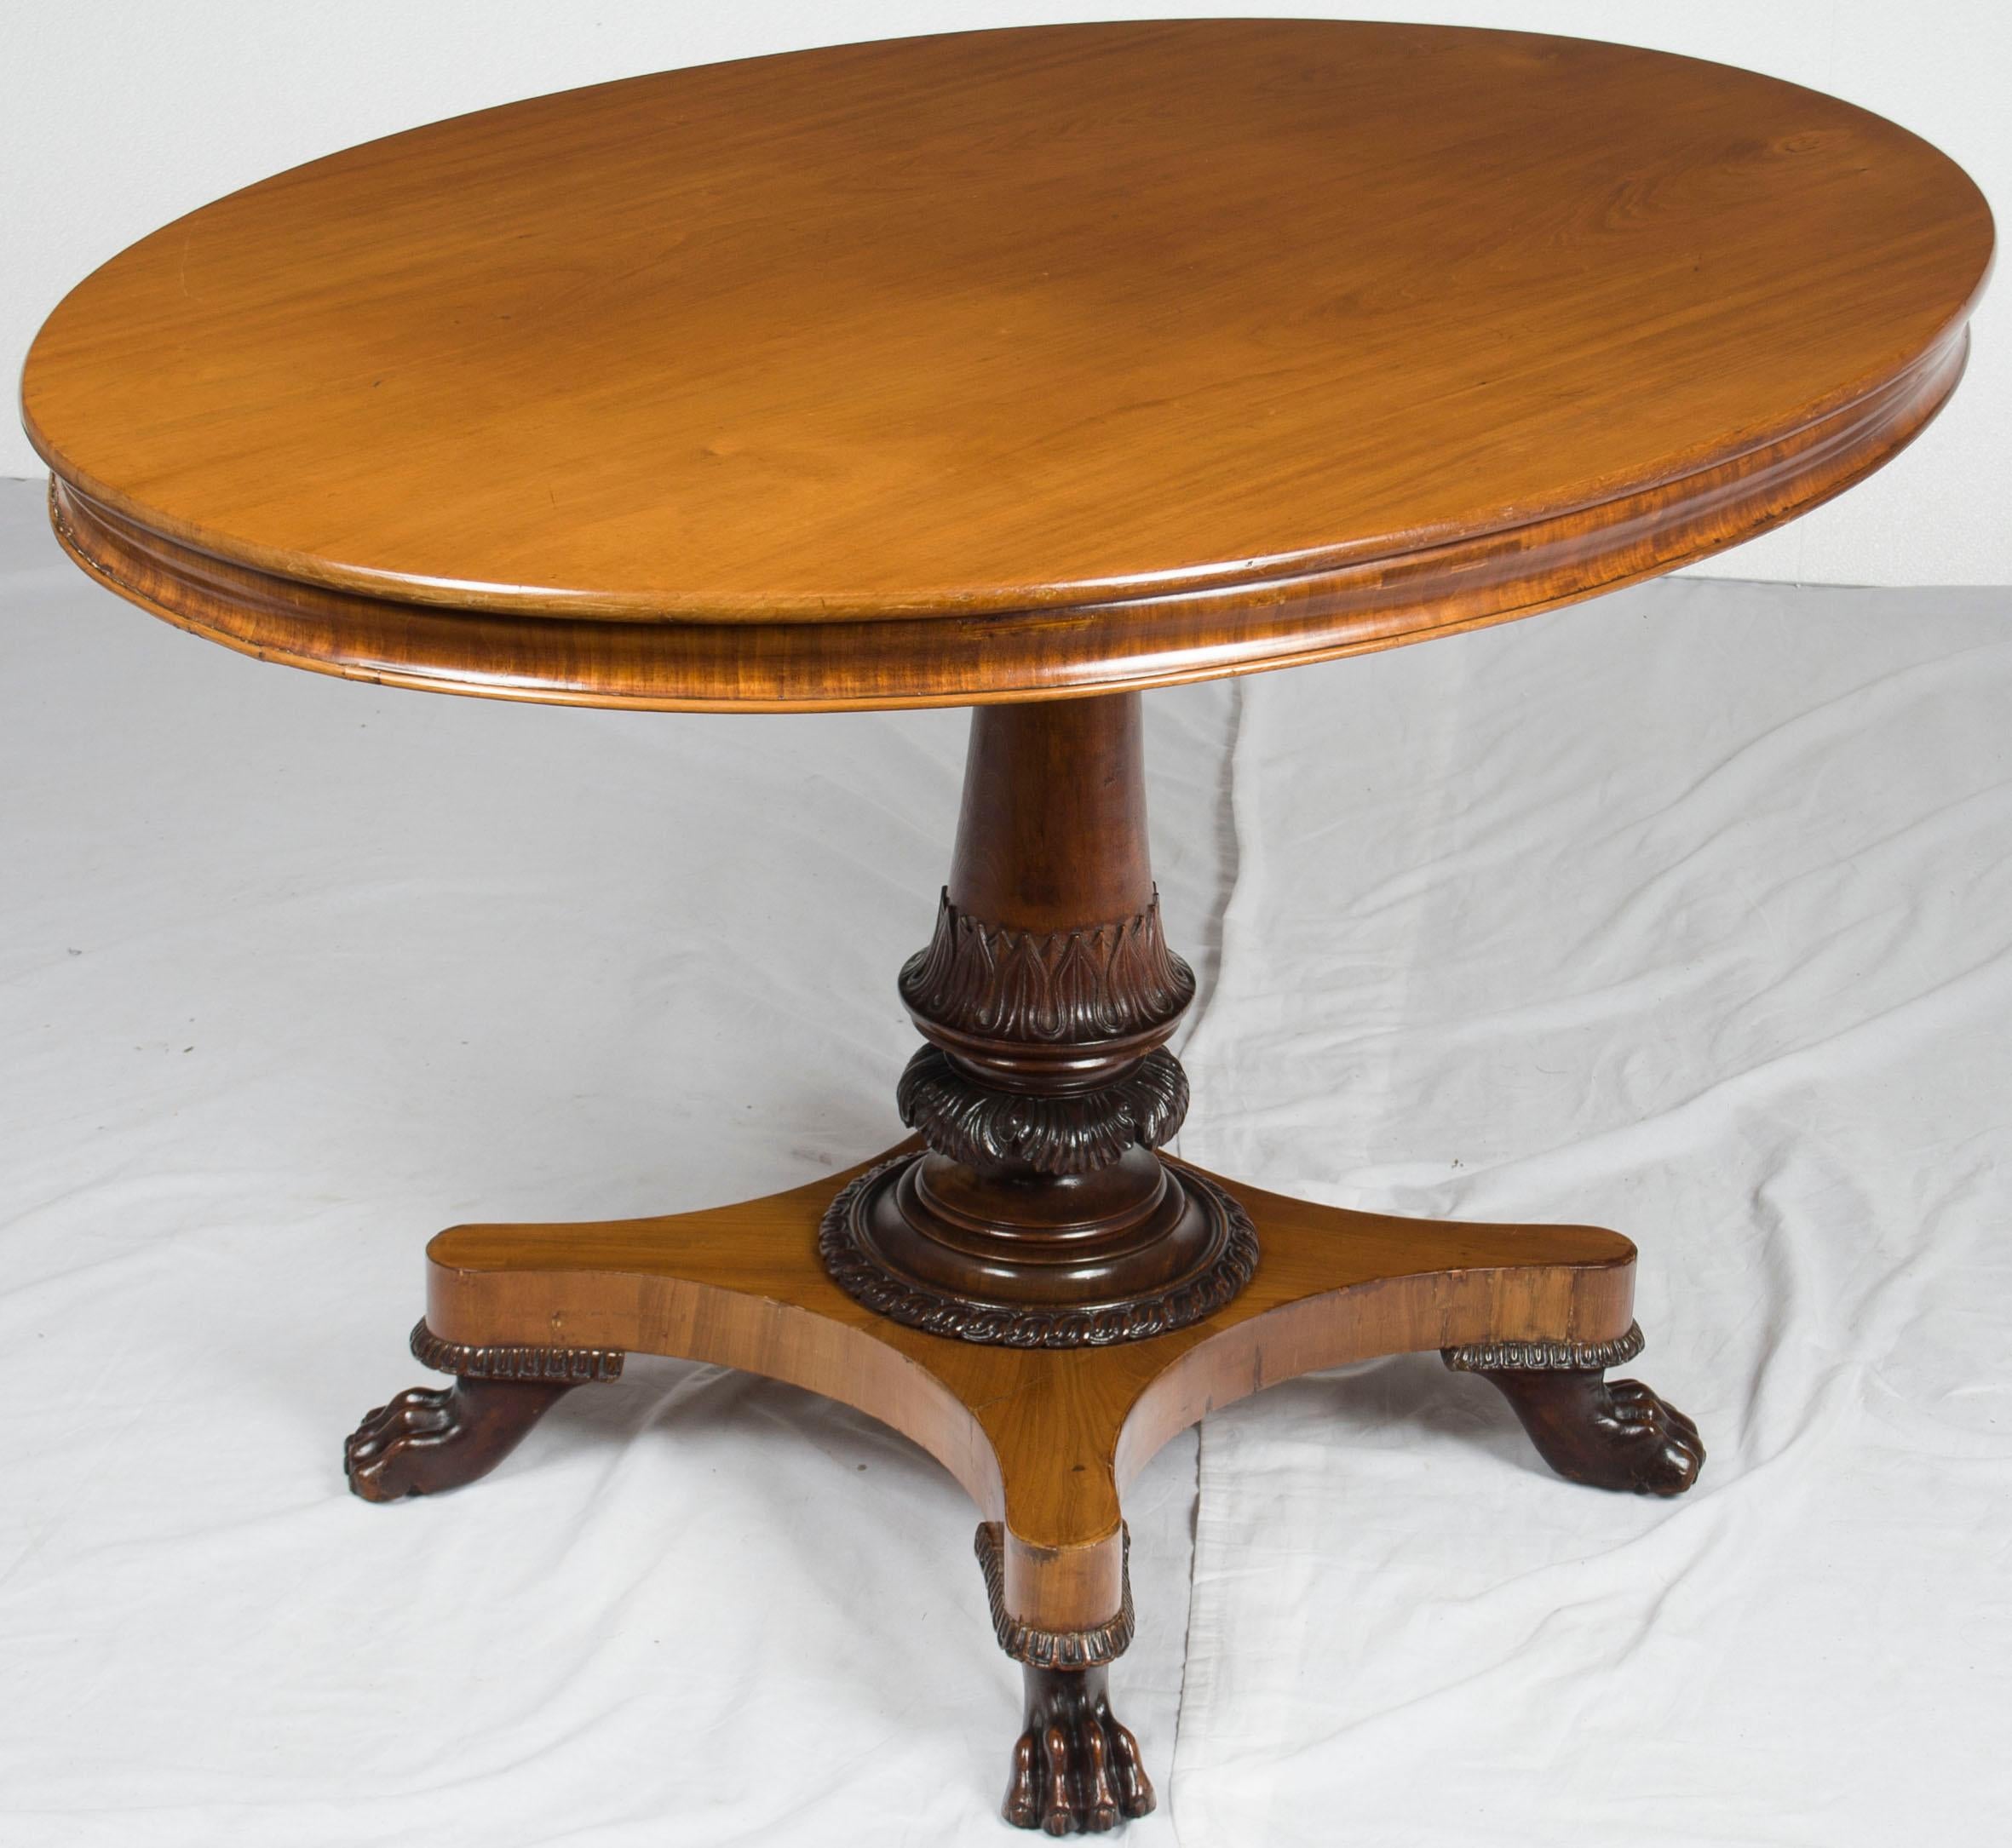 Mahogany and Oak Empire Style Large Oval Center Foyer Table Claw Foot Pedestal im Angebot 1